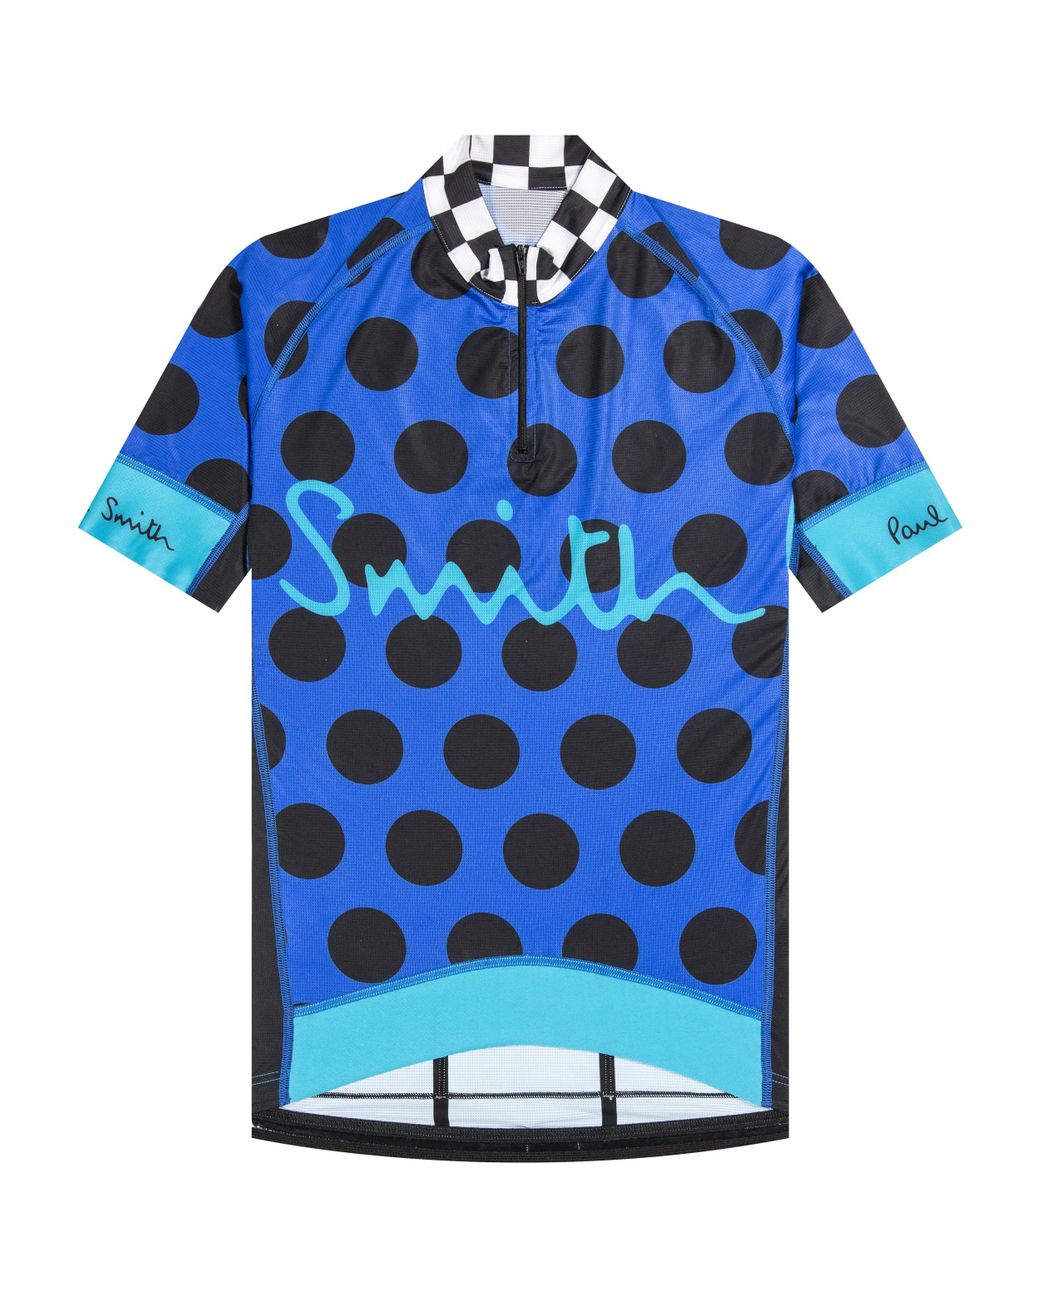 Paul Smith Cycling Jersey Sale Hot Sale, SAVE 59%.